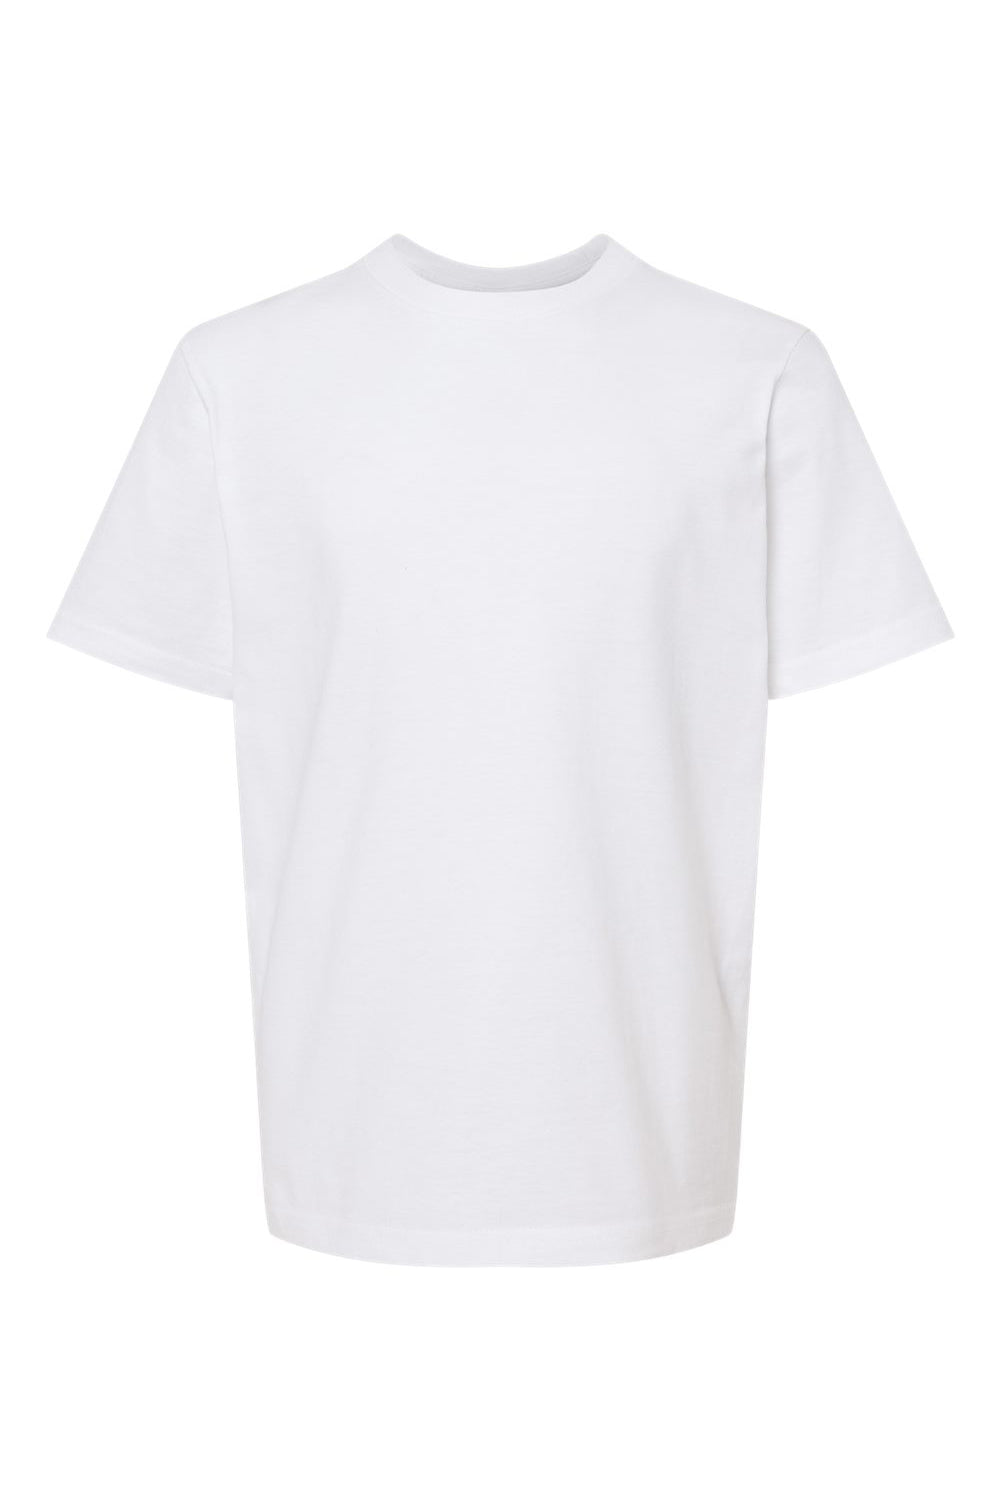 Tultex 295 Youth Jersey Short Sleeve Crewneck T-Shirt White Flat Front